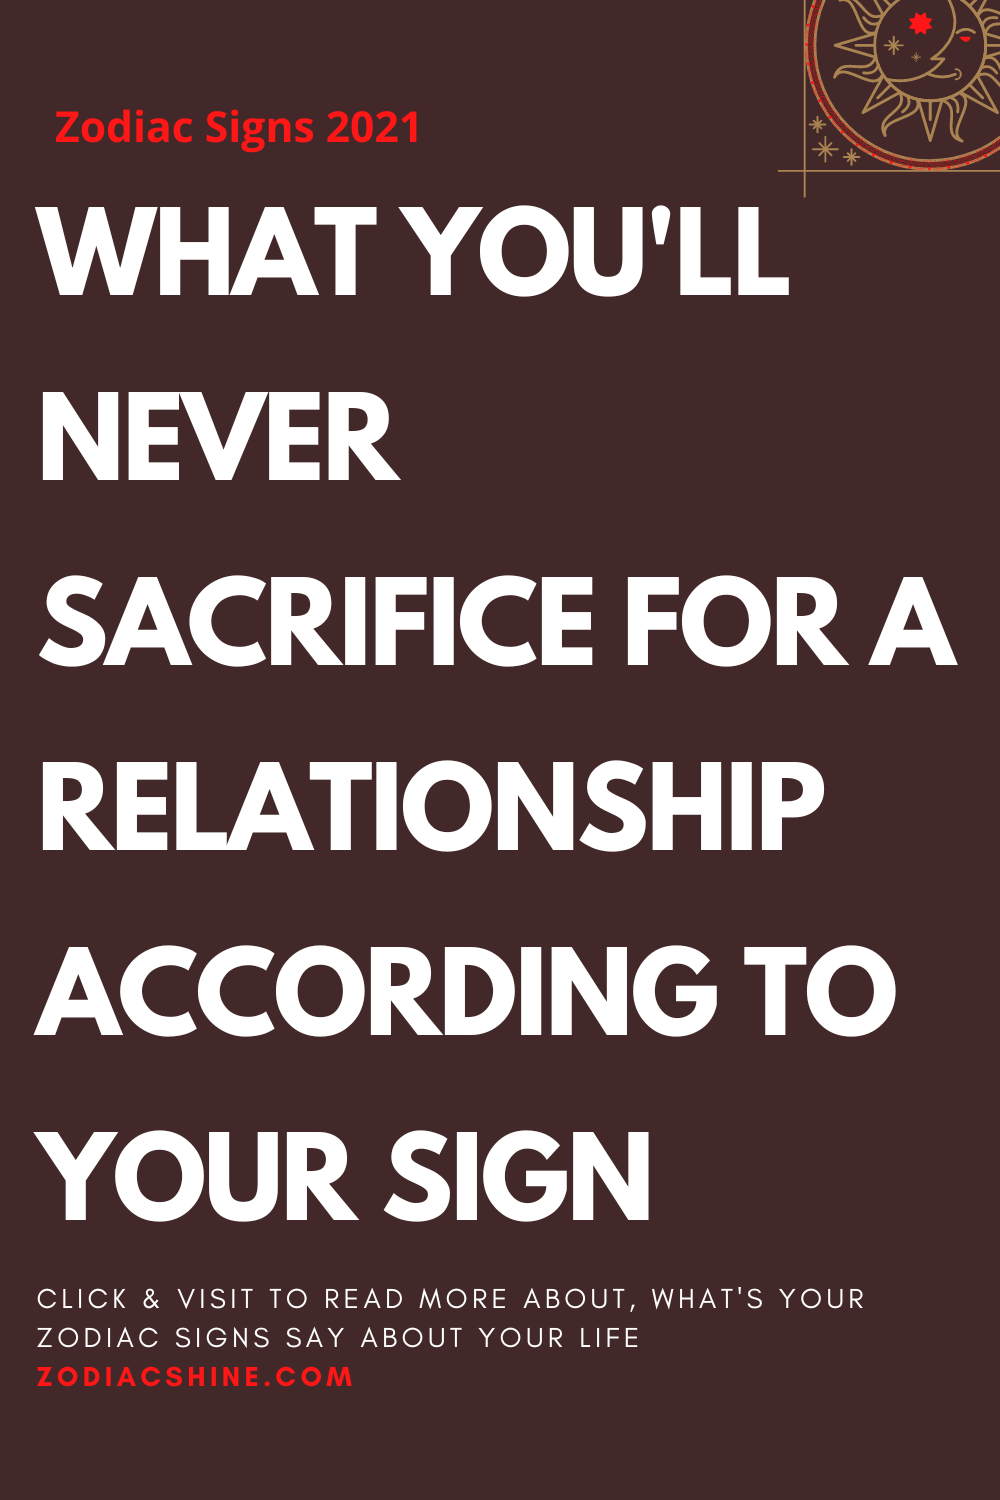 WHAT YOU'LL NEVER SACRIFICE FOR A RELATIONSHIP ACCORDING TO YOUR SIGN